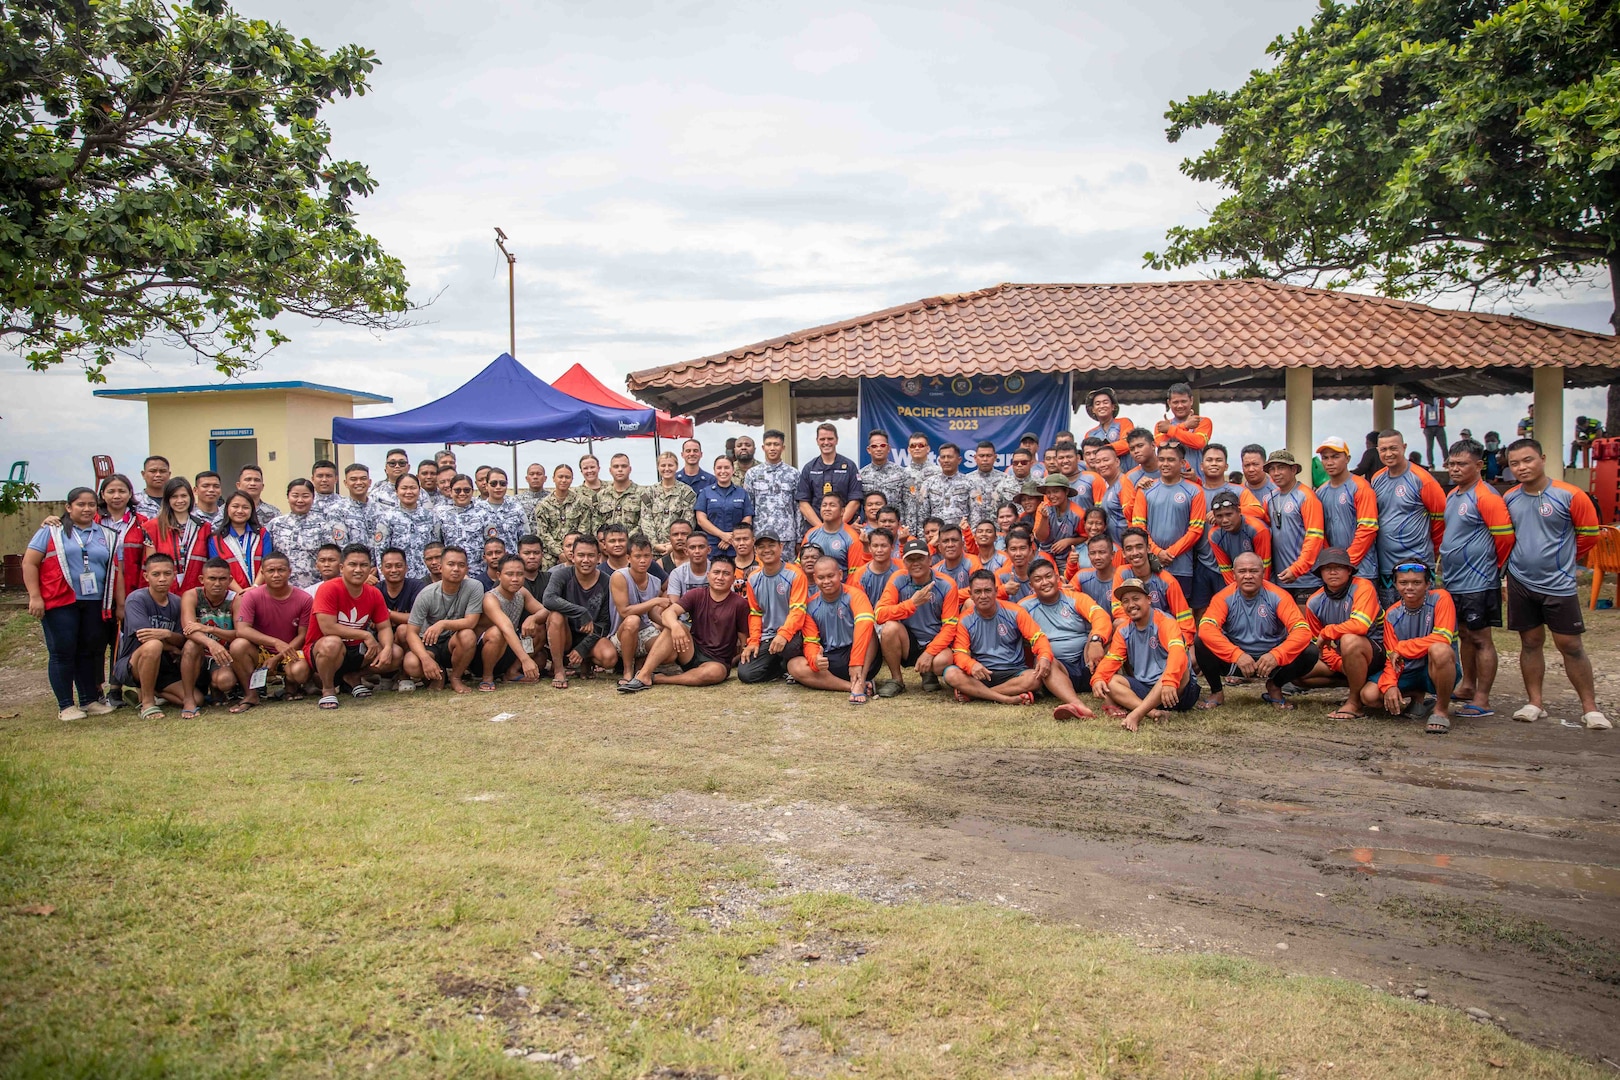 Capt. Joseph Dransfield, Pacific Partnership 2023 Deputy Mission Commander, U.S. Navy, Filipino Coast Guard and Filipino Navy pose for a group photo after water search and rescue exercise at San Fernando Coast Guard Station, Aug 29. Now in its 18th year, Pacific Partnership is the largest annual multinational humanitarian assistance and disaster relief preparedness mission conducted in the Indo-Pacific. (U.S. Navy Photo by Mass Communication Specialist 2nd Class Megan Alexander)